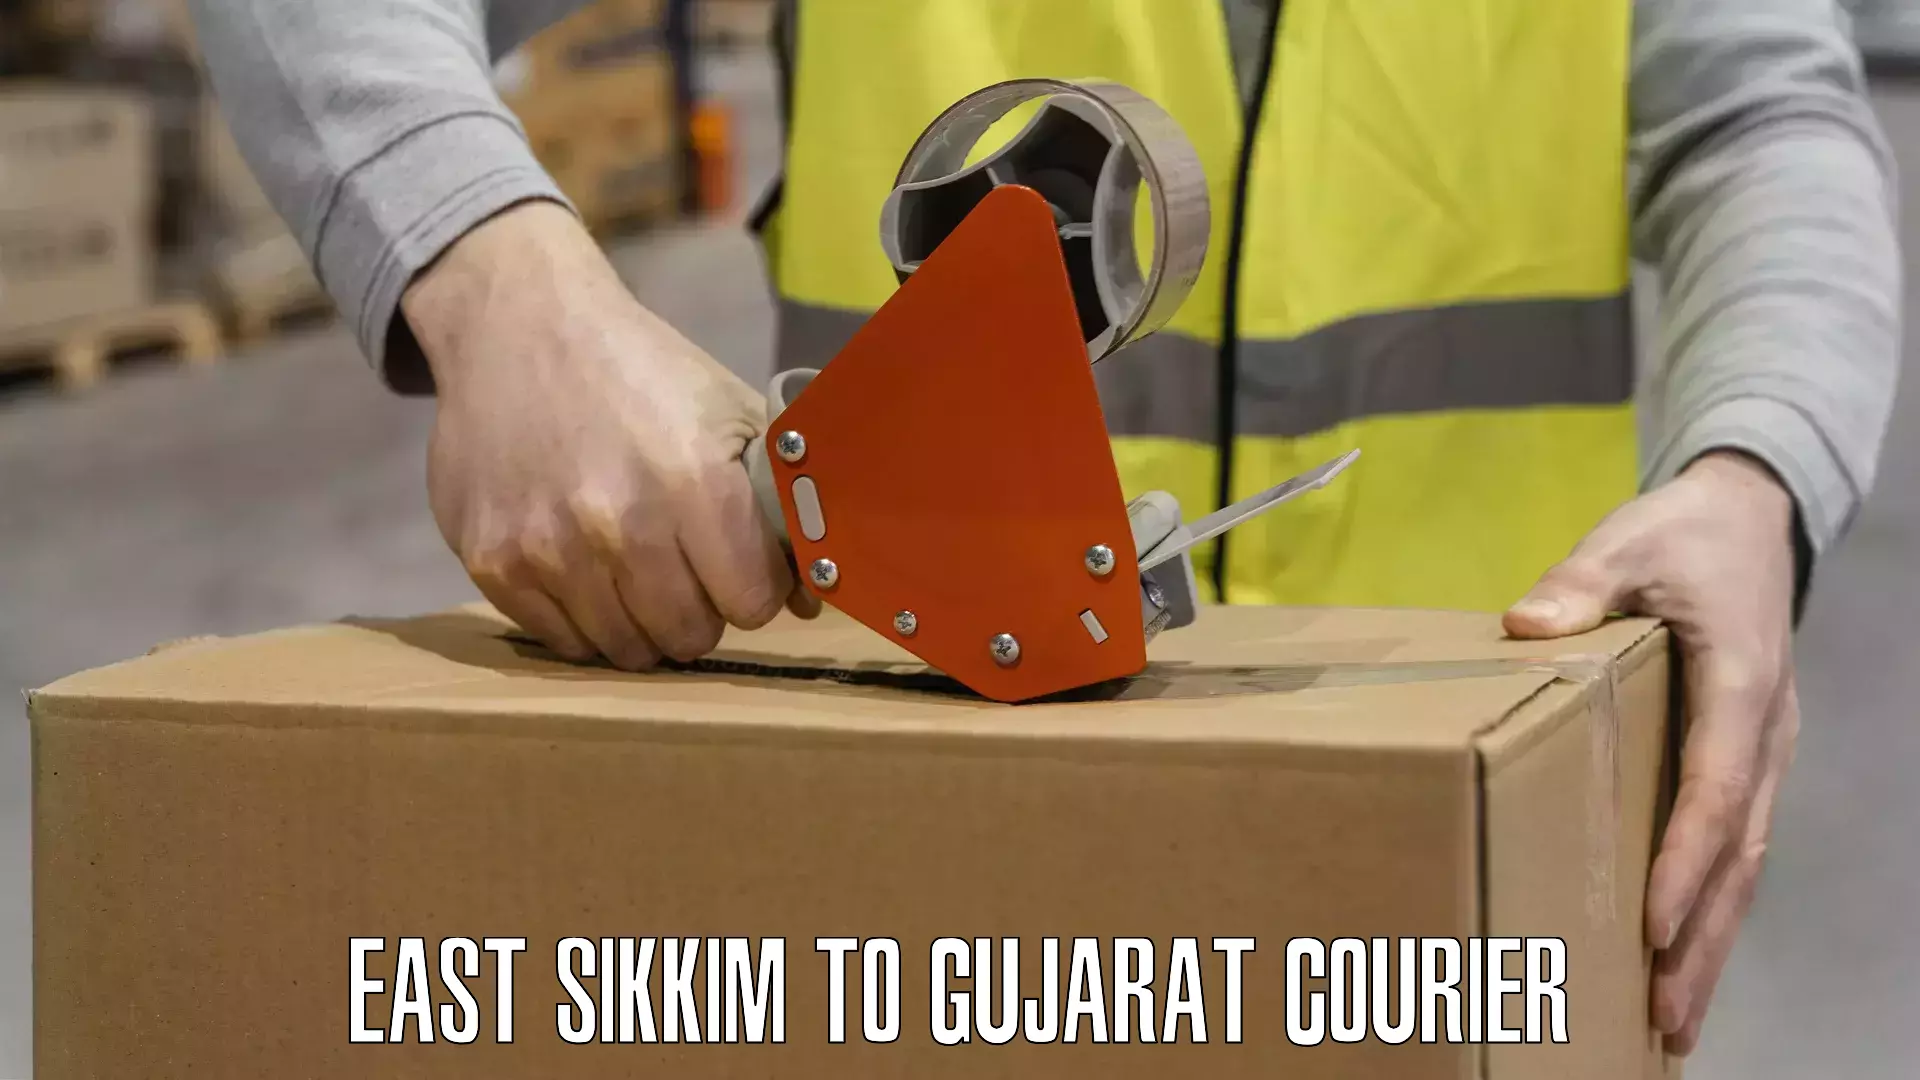 Bulk courier orders East Sikkim to Gujarat